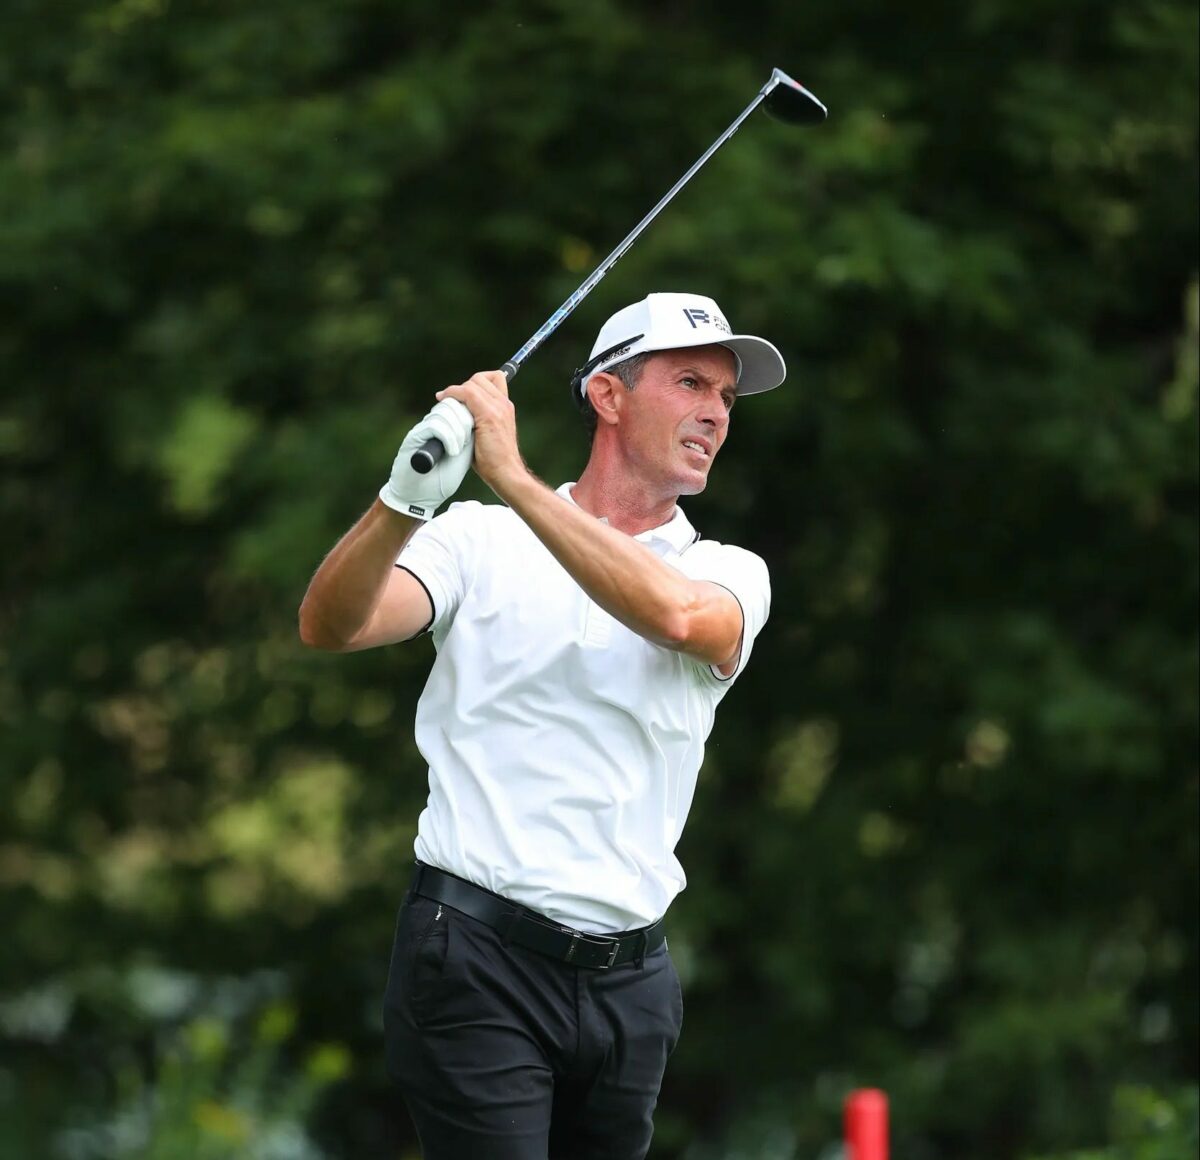 Mike Weir is setting the pace heading into the final round of the Dick’s Sporting Goods Open